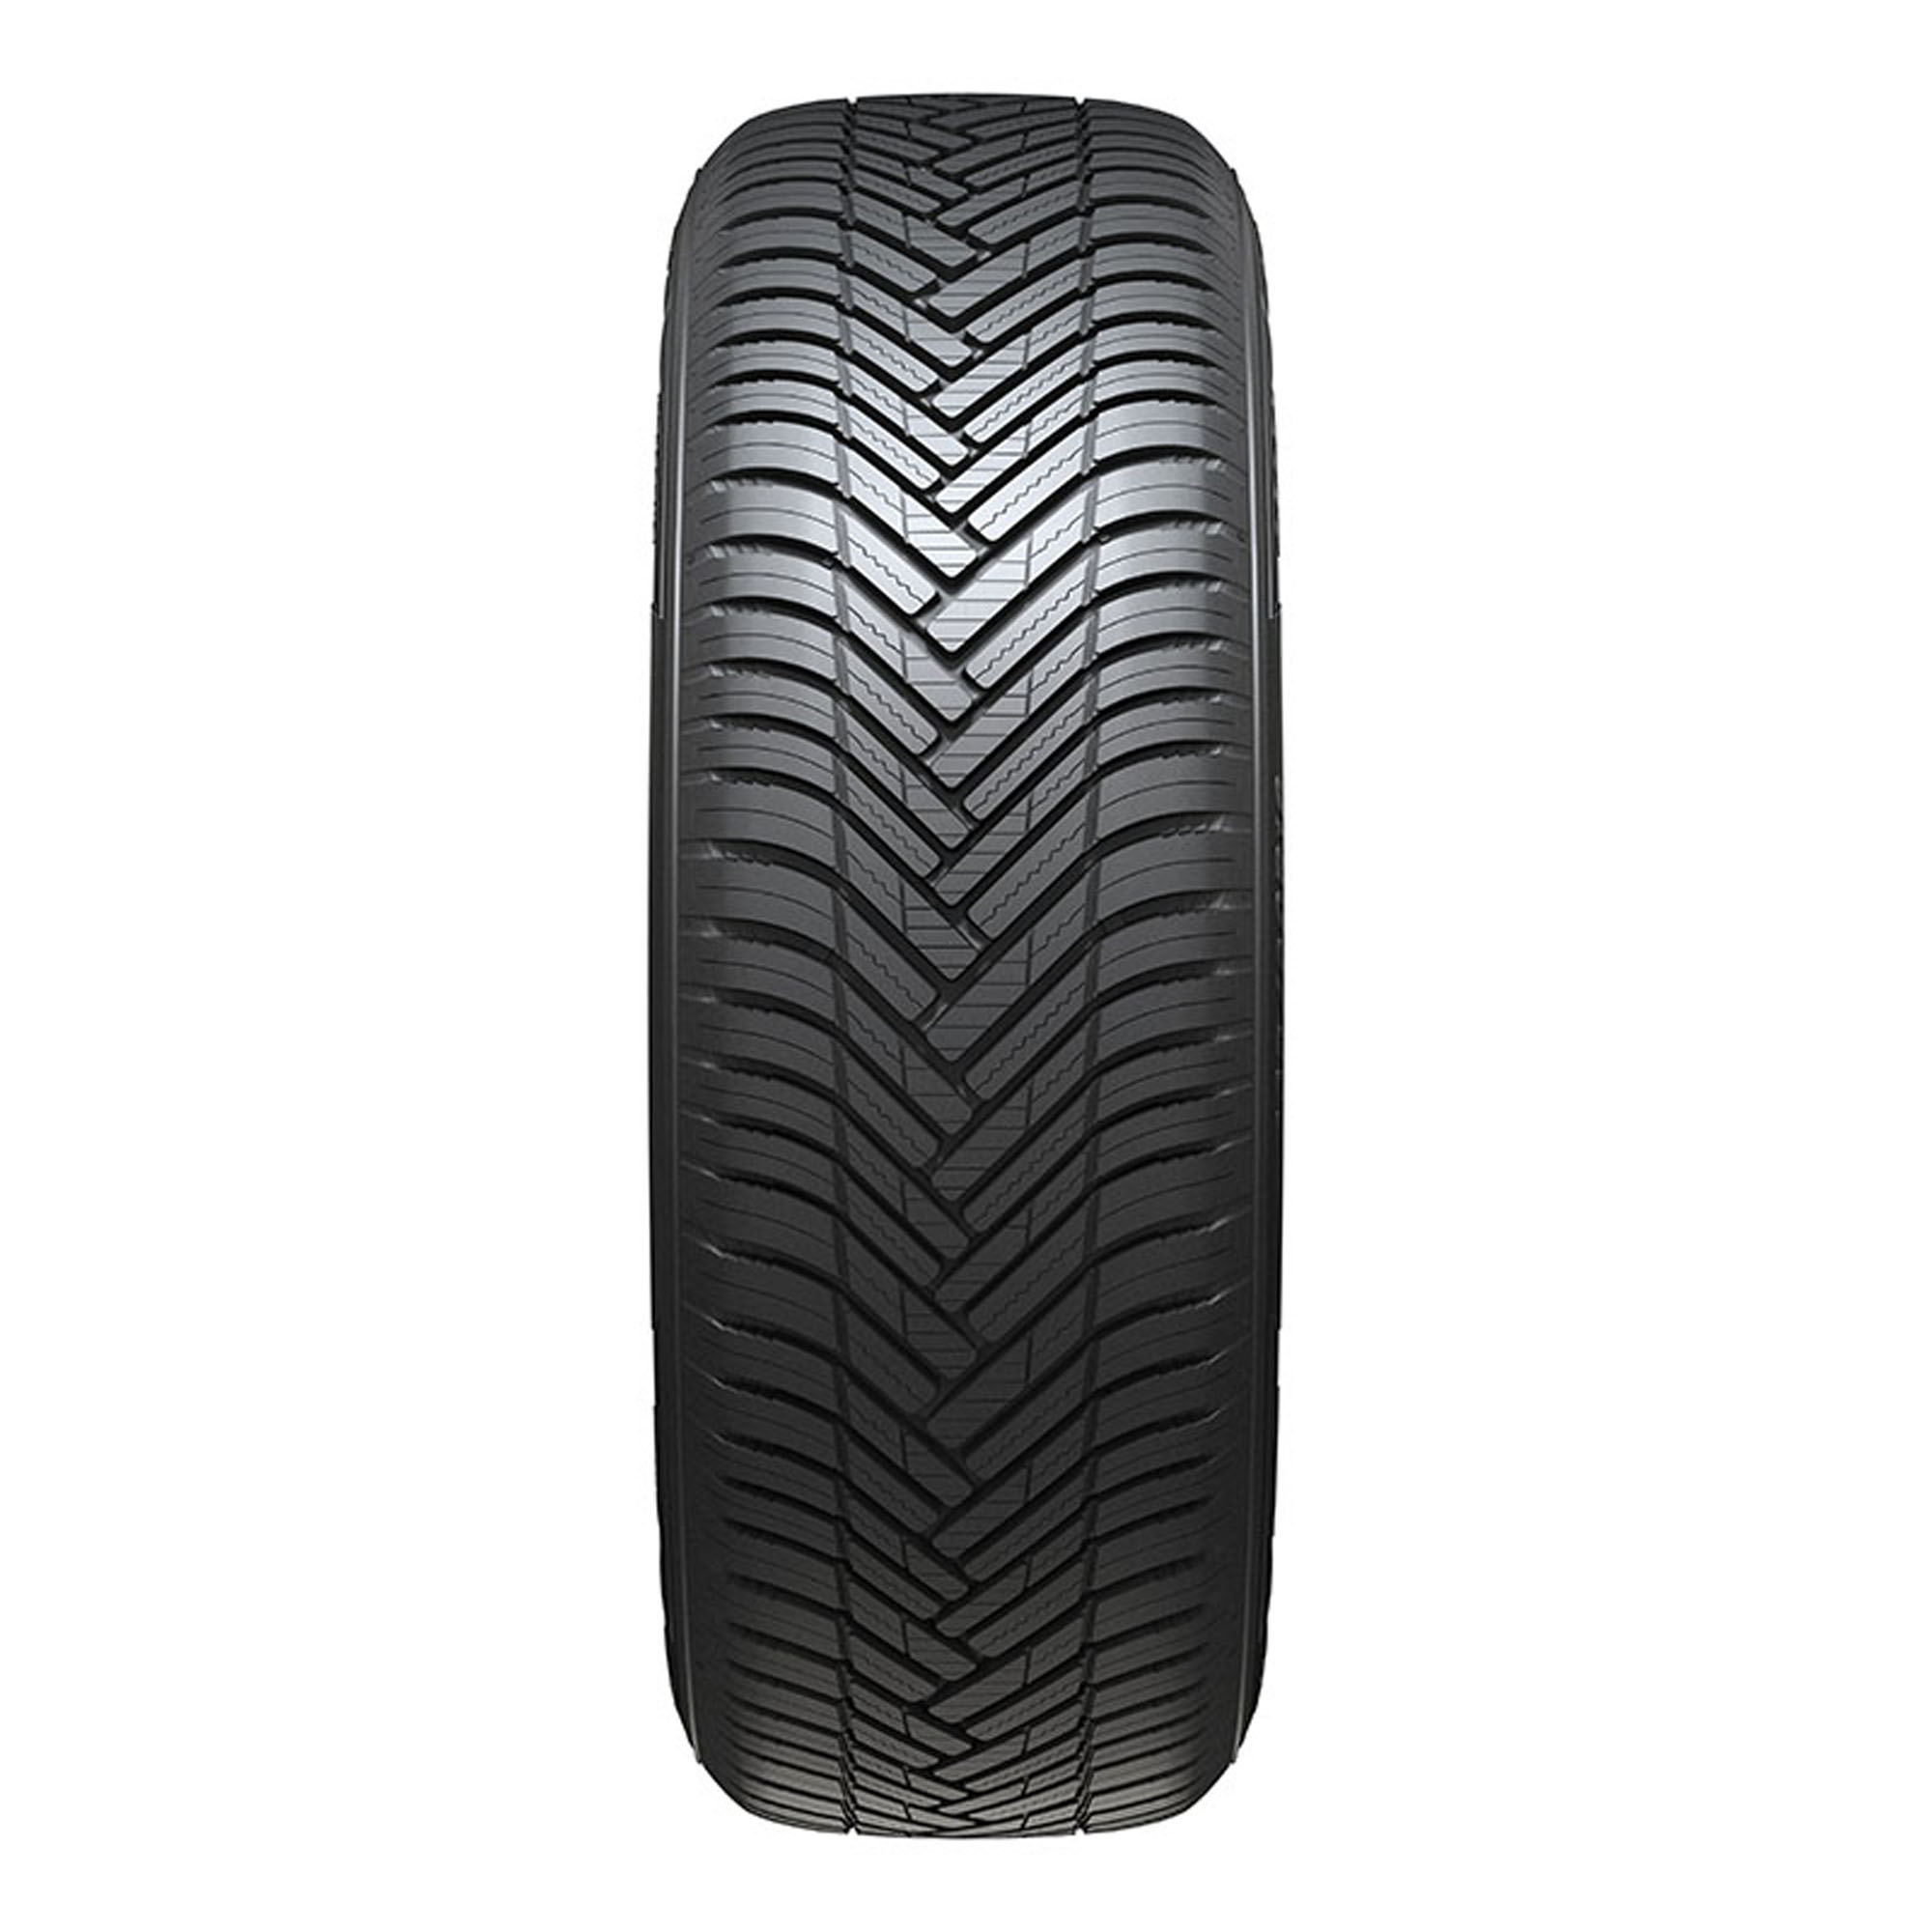 Hankook Kinergy 4S2 X (H750A) All Weather 225/60R17 99H SUV/Crossover Tire - image 3 of 4